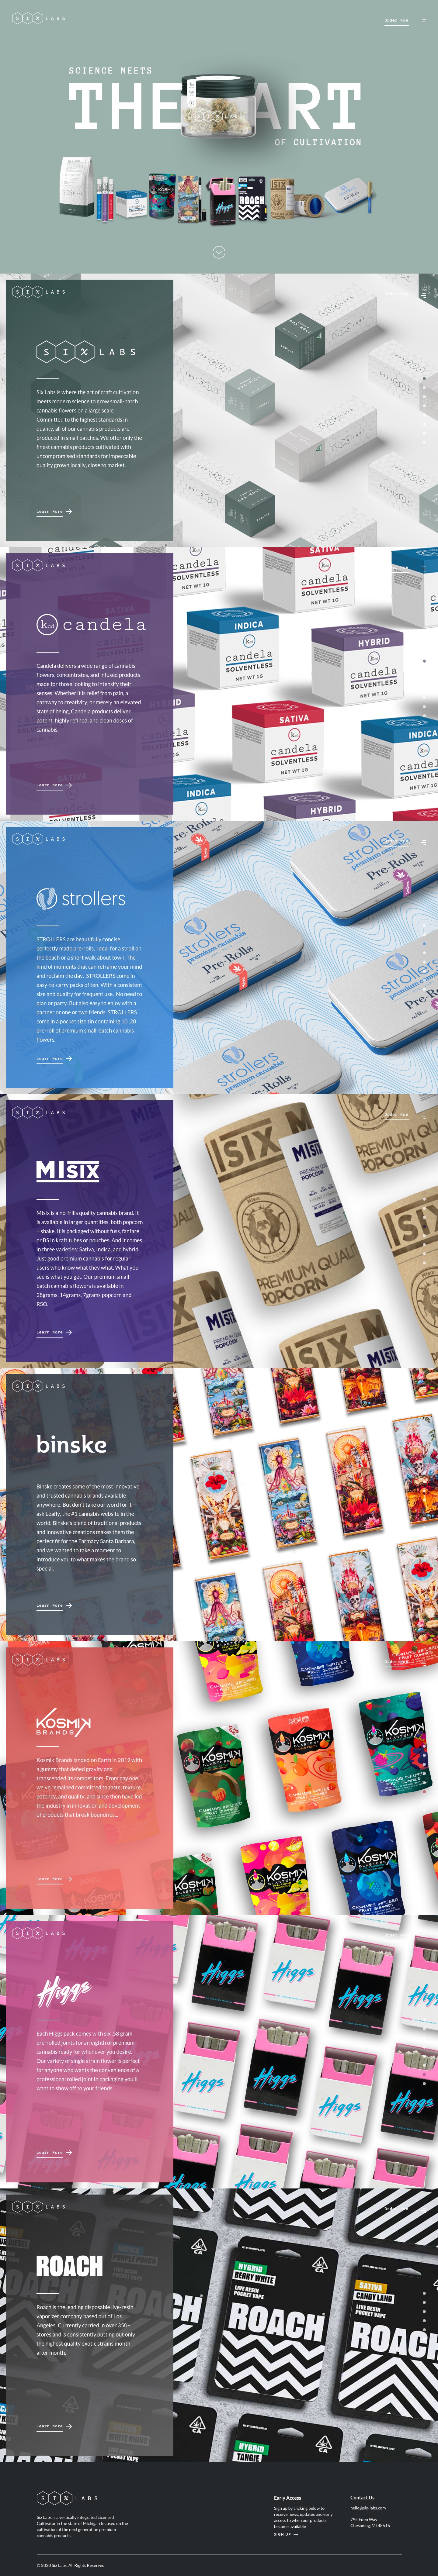 Six Labs Brands Page